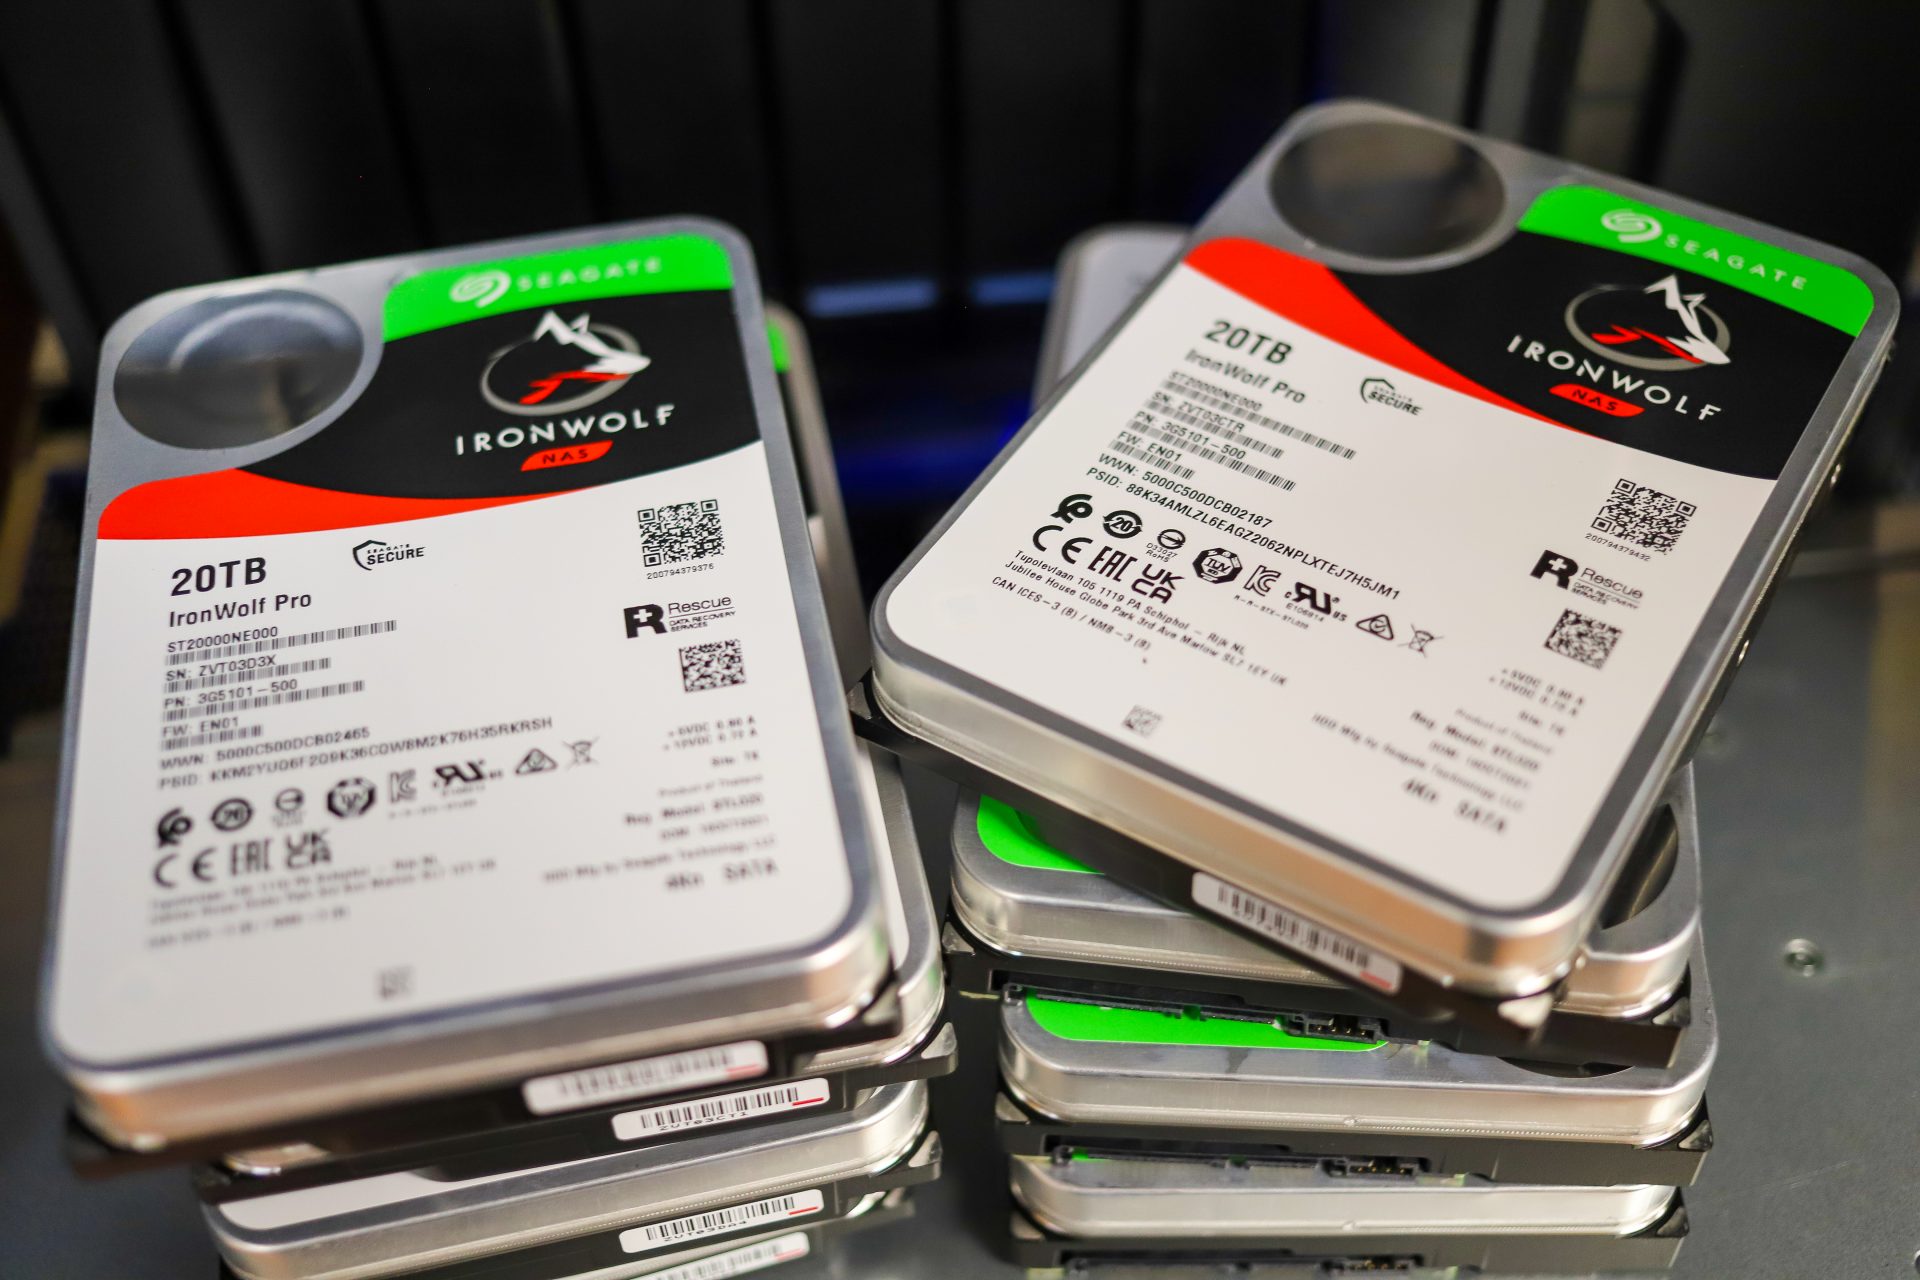 Seagate IronWolf Pro 20TB NAS HDD レビュー - StorageReview.com